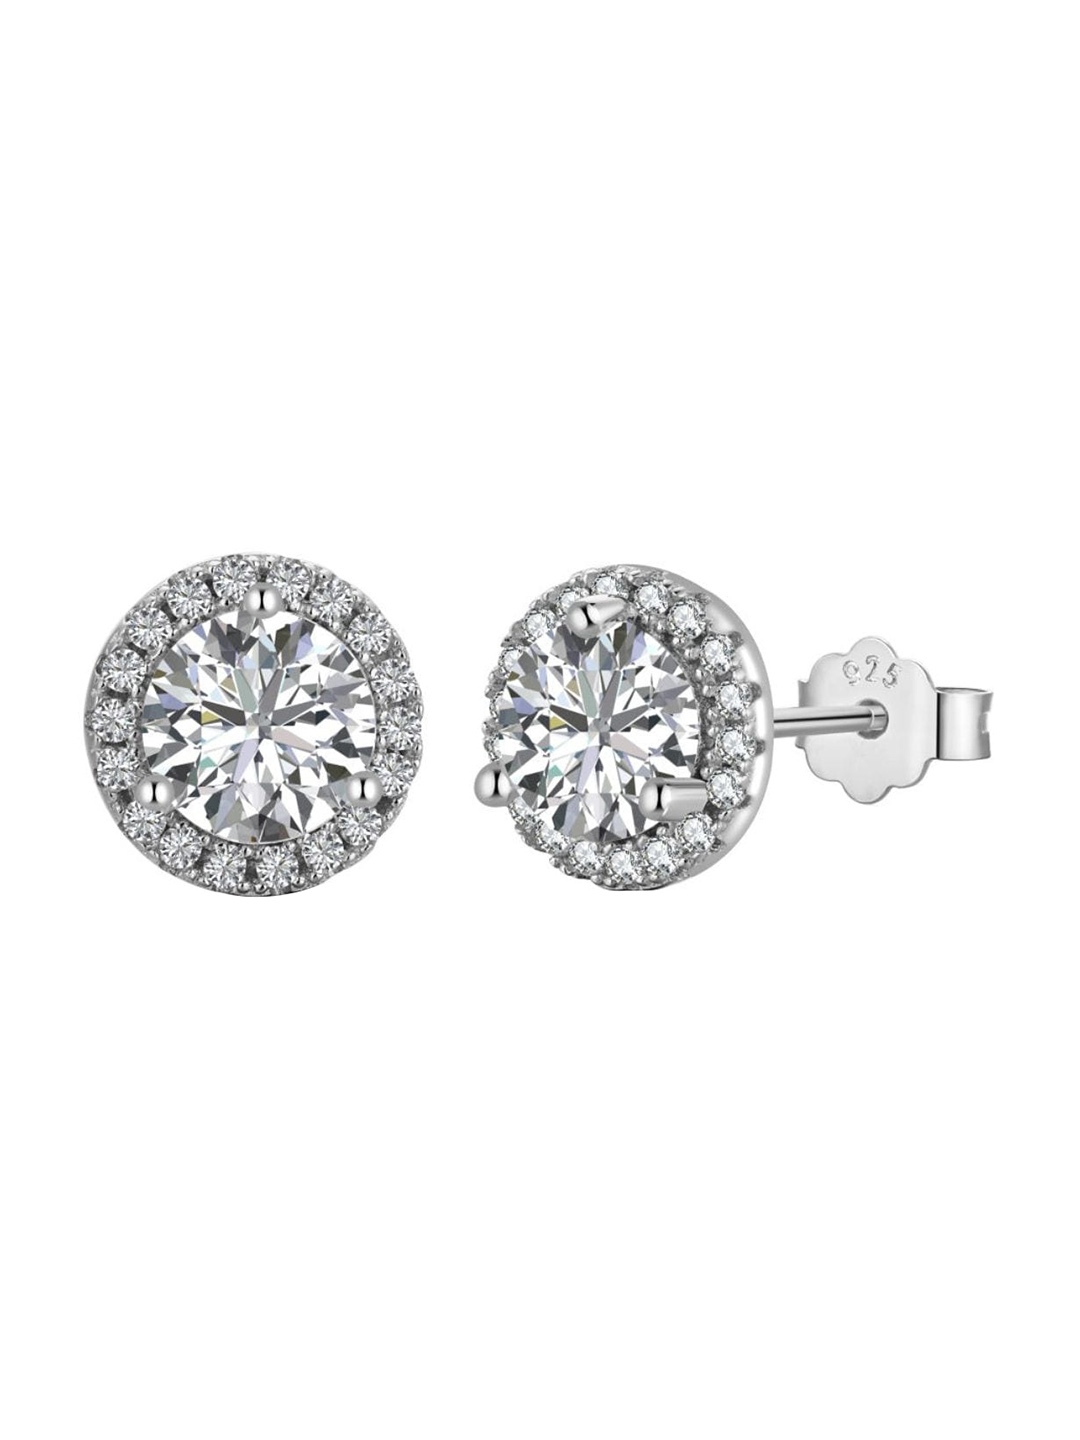 

BRIA JEWELS Rhodium-Plated Cubic Zirconia-Studded 925 Sterling Silver Studs Earrings